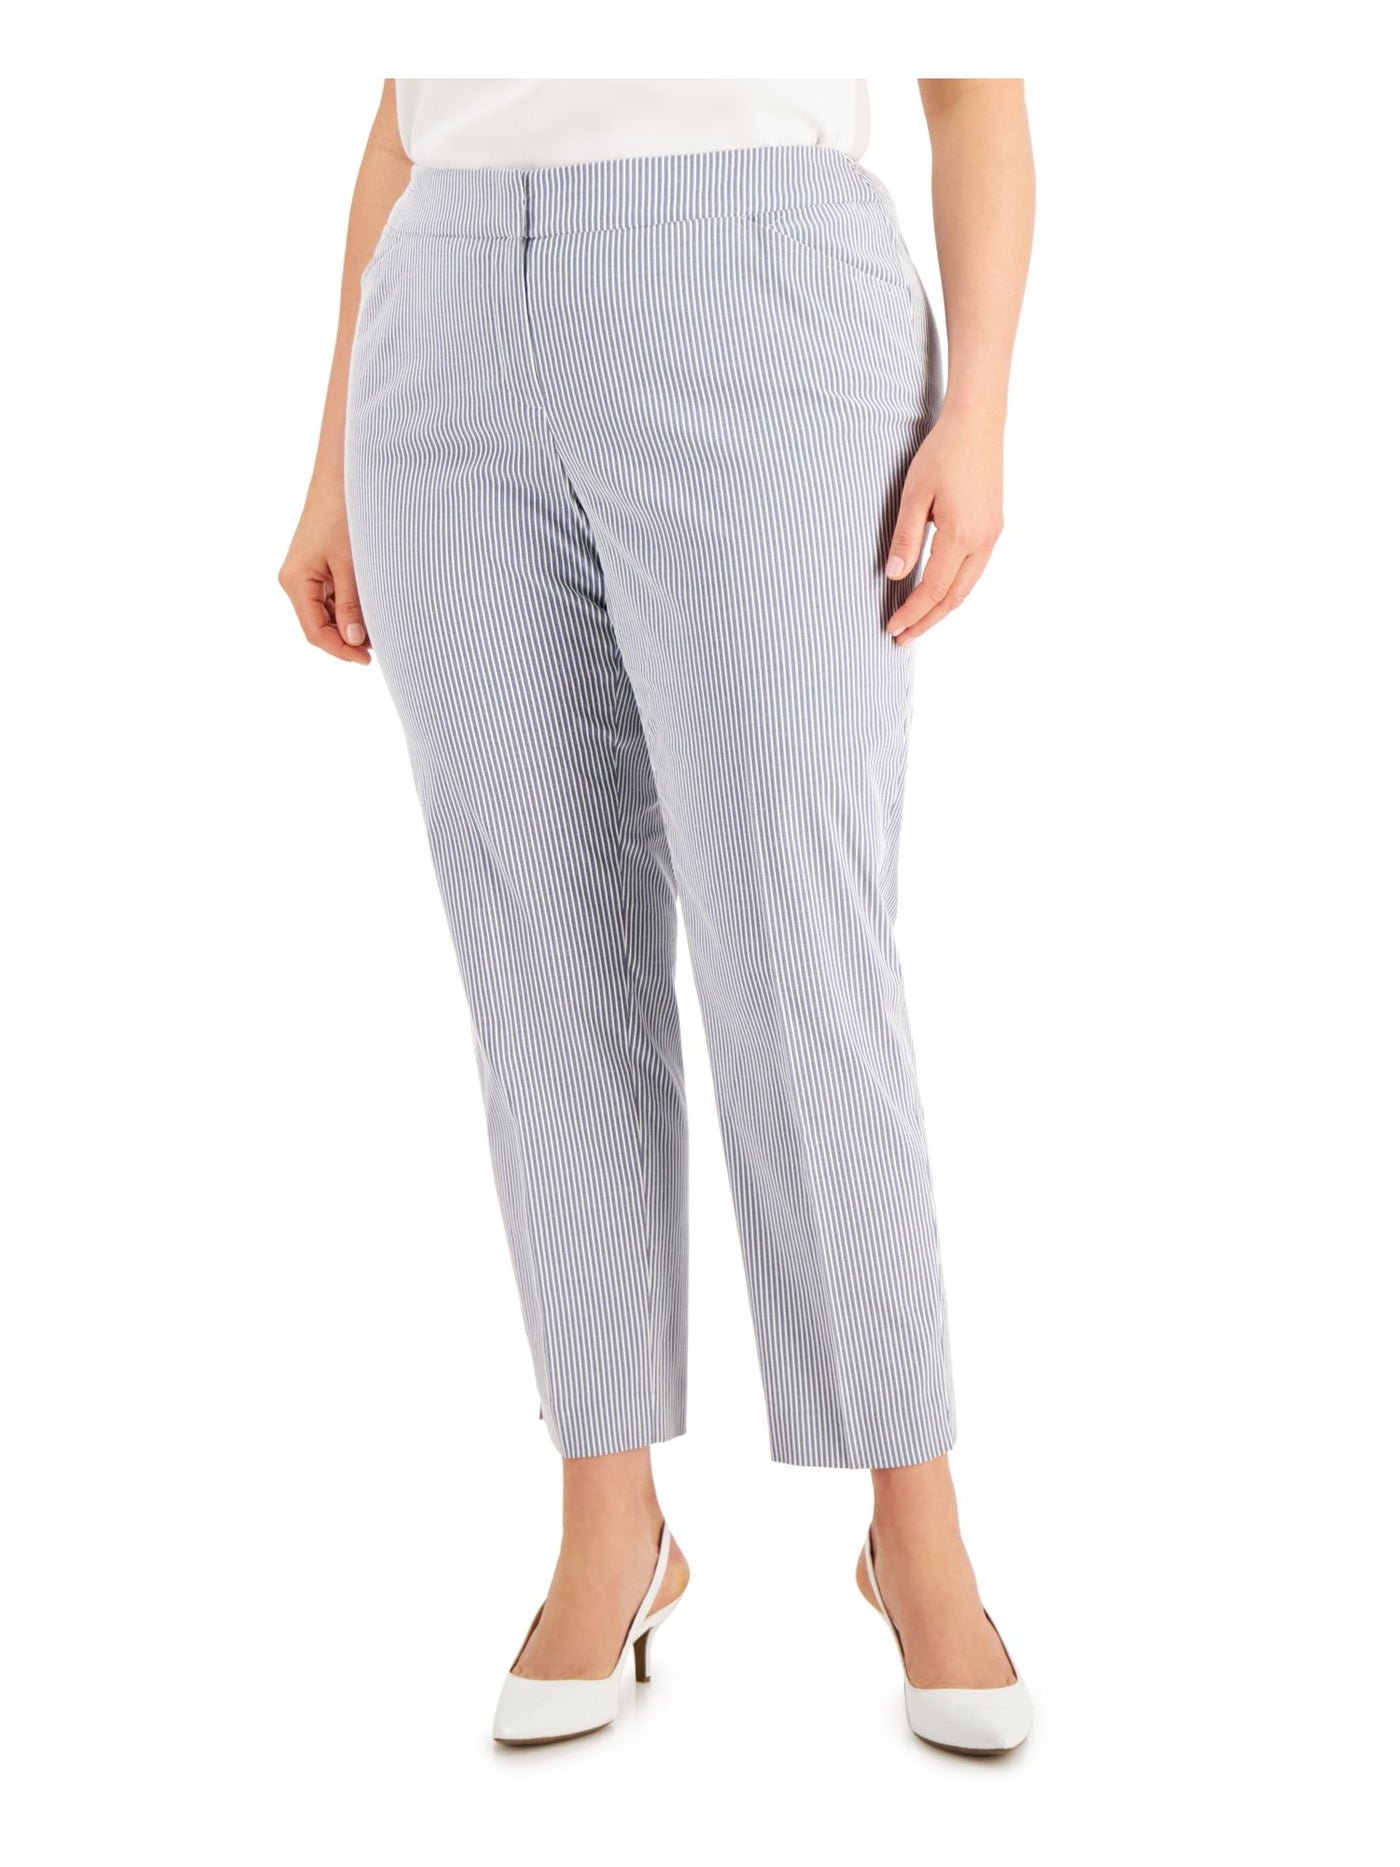 KASPER Womens Gray Chambray Pocketed Zippered Ankle-length Striped Pants Plus 24W